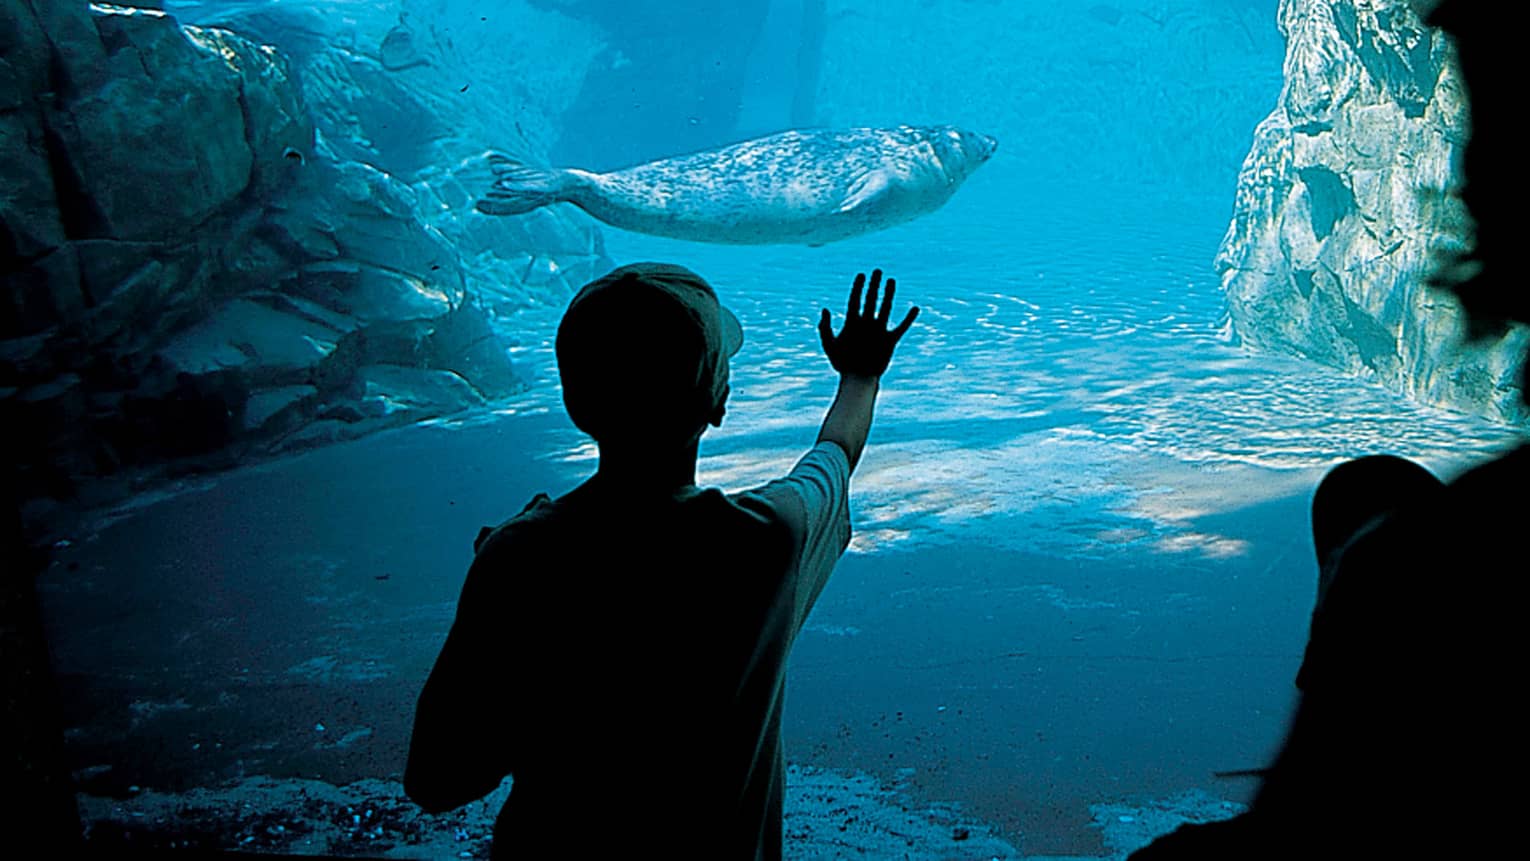 Seal swims underwater in aquarium, silhouette of child with hand against glass